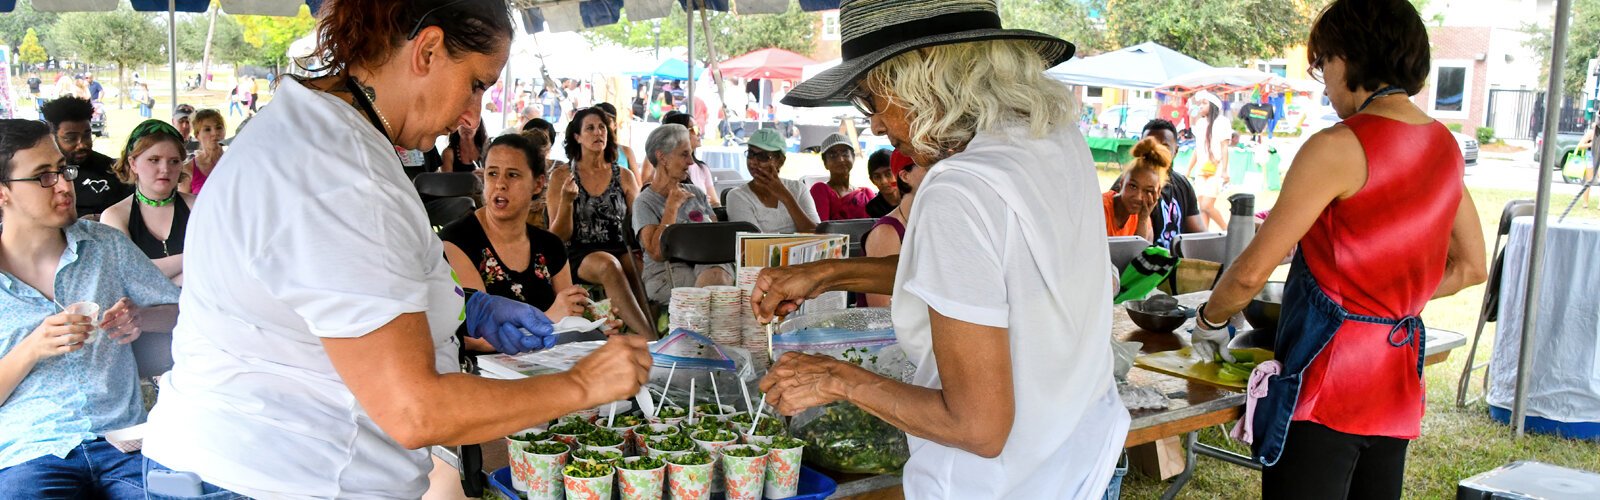 Two VegFest volunteers help with samples of Chef Timaree Hagenburger’s kale salad, prepared ahead of time, to give out to the audience to taste.